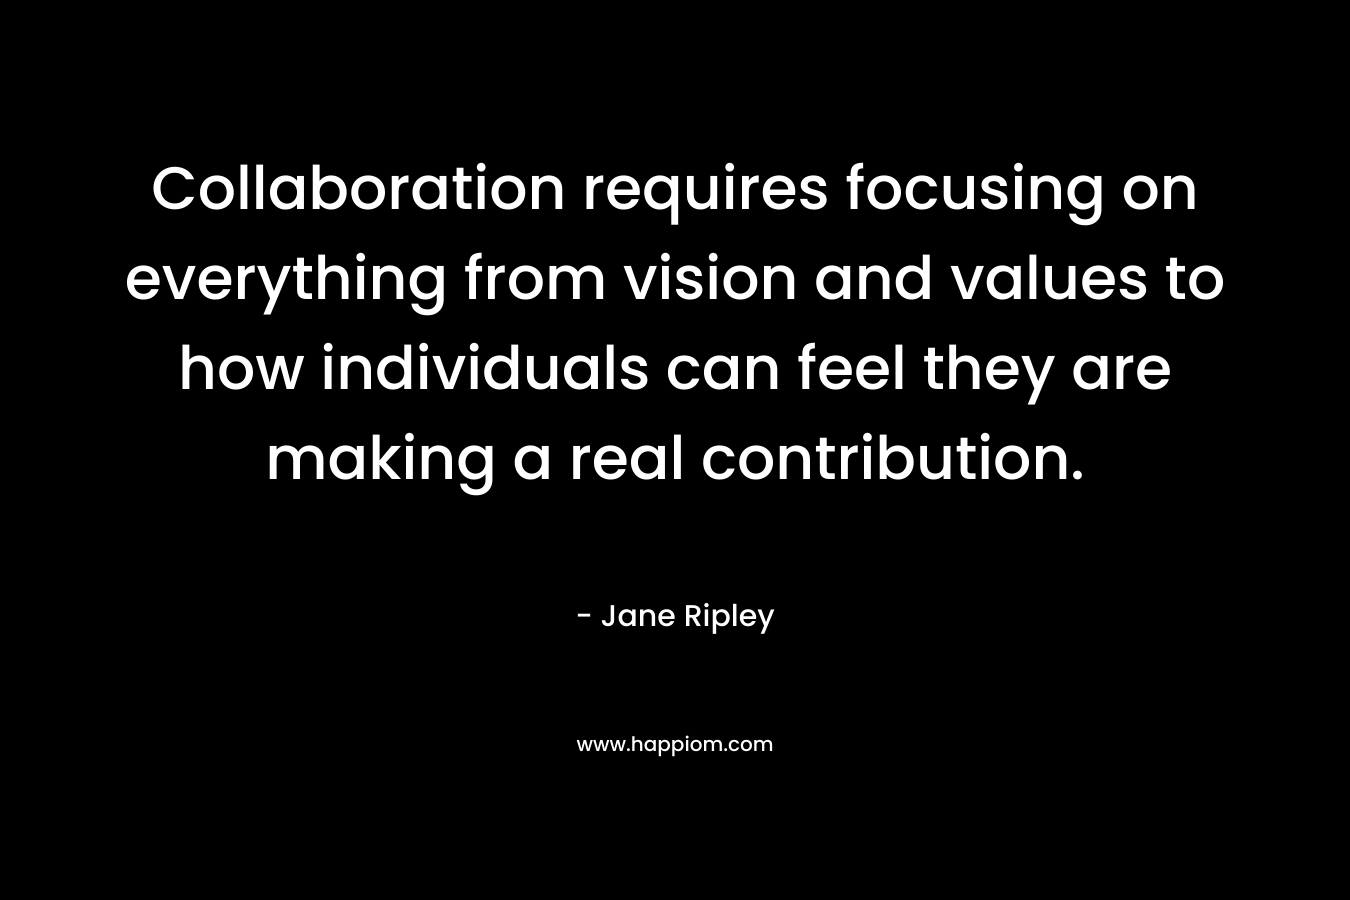 Collaboration requires focusing on everything from vision and values to how individuals can feel they are making a real contribution.